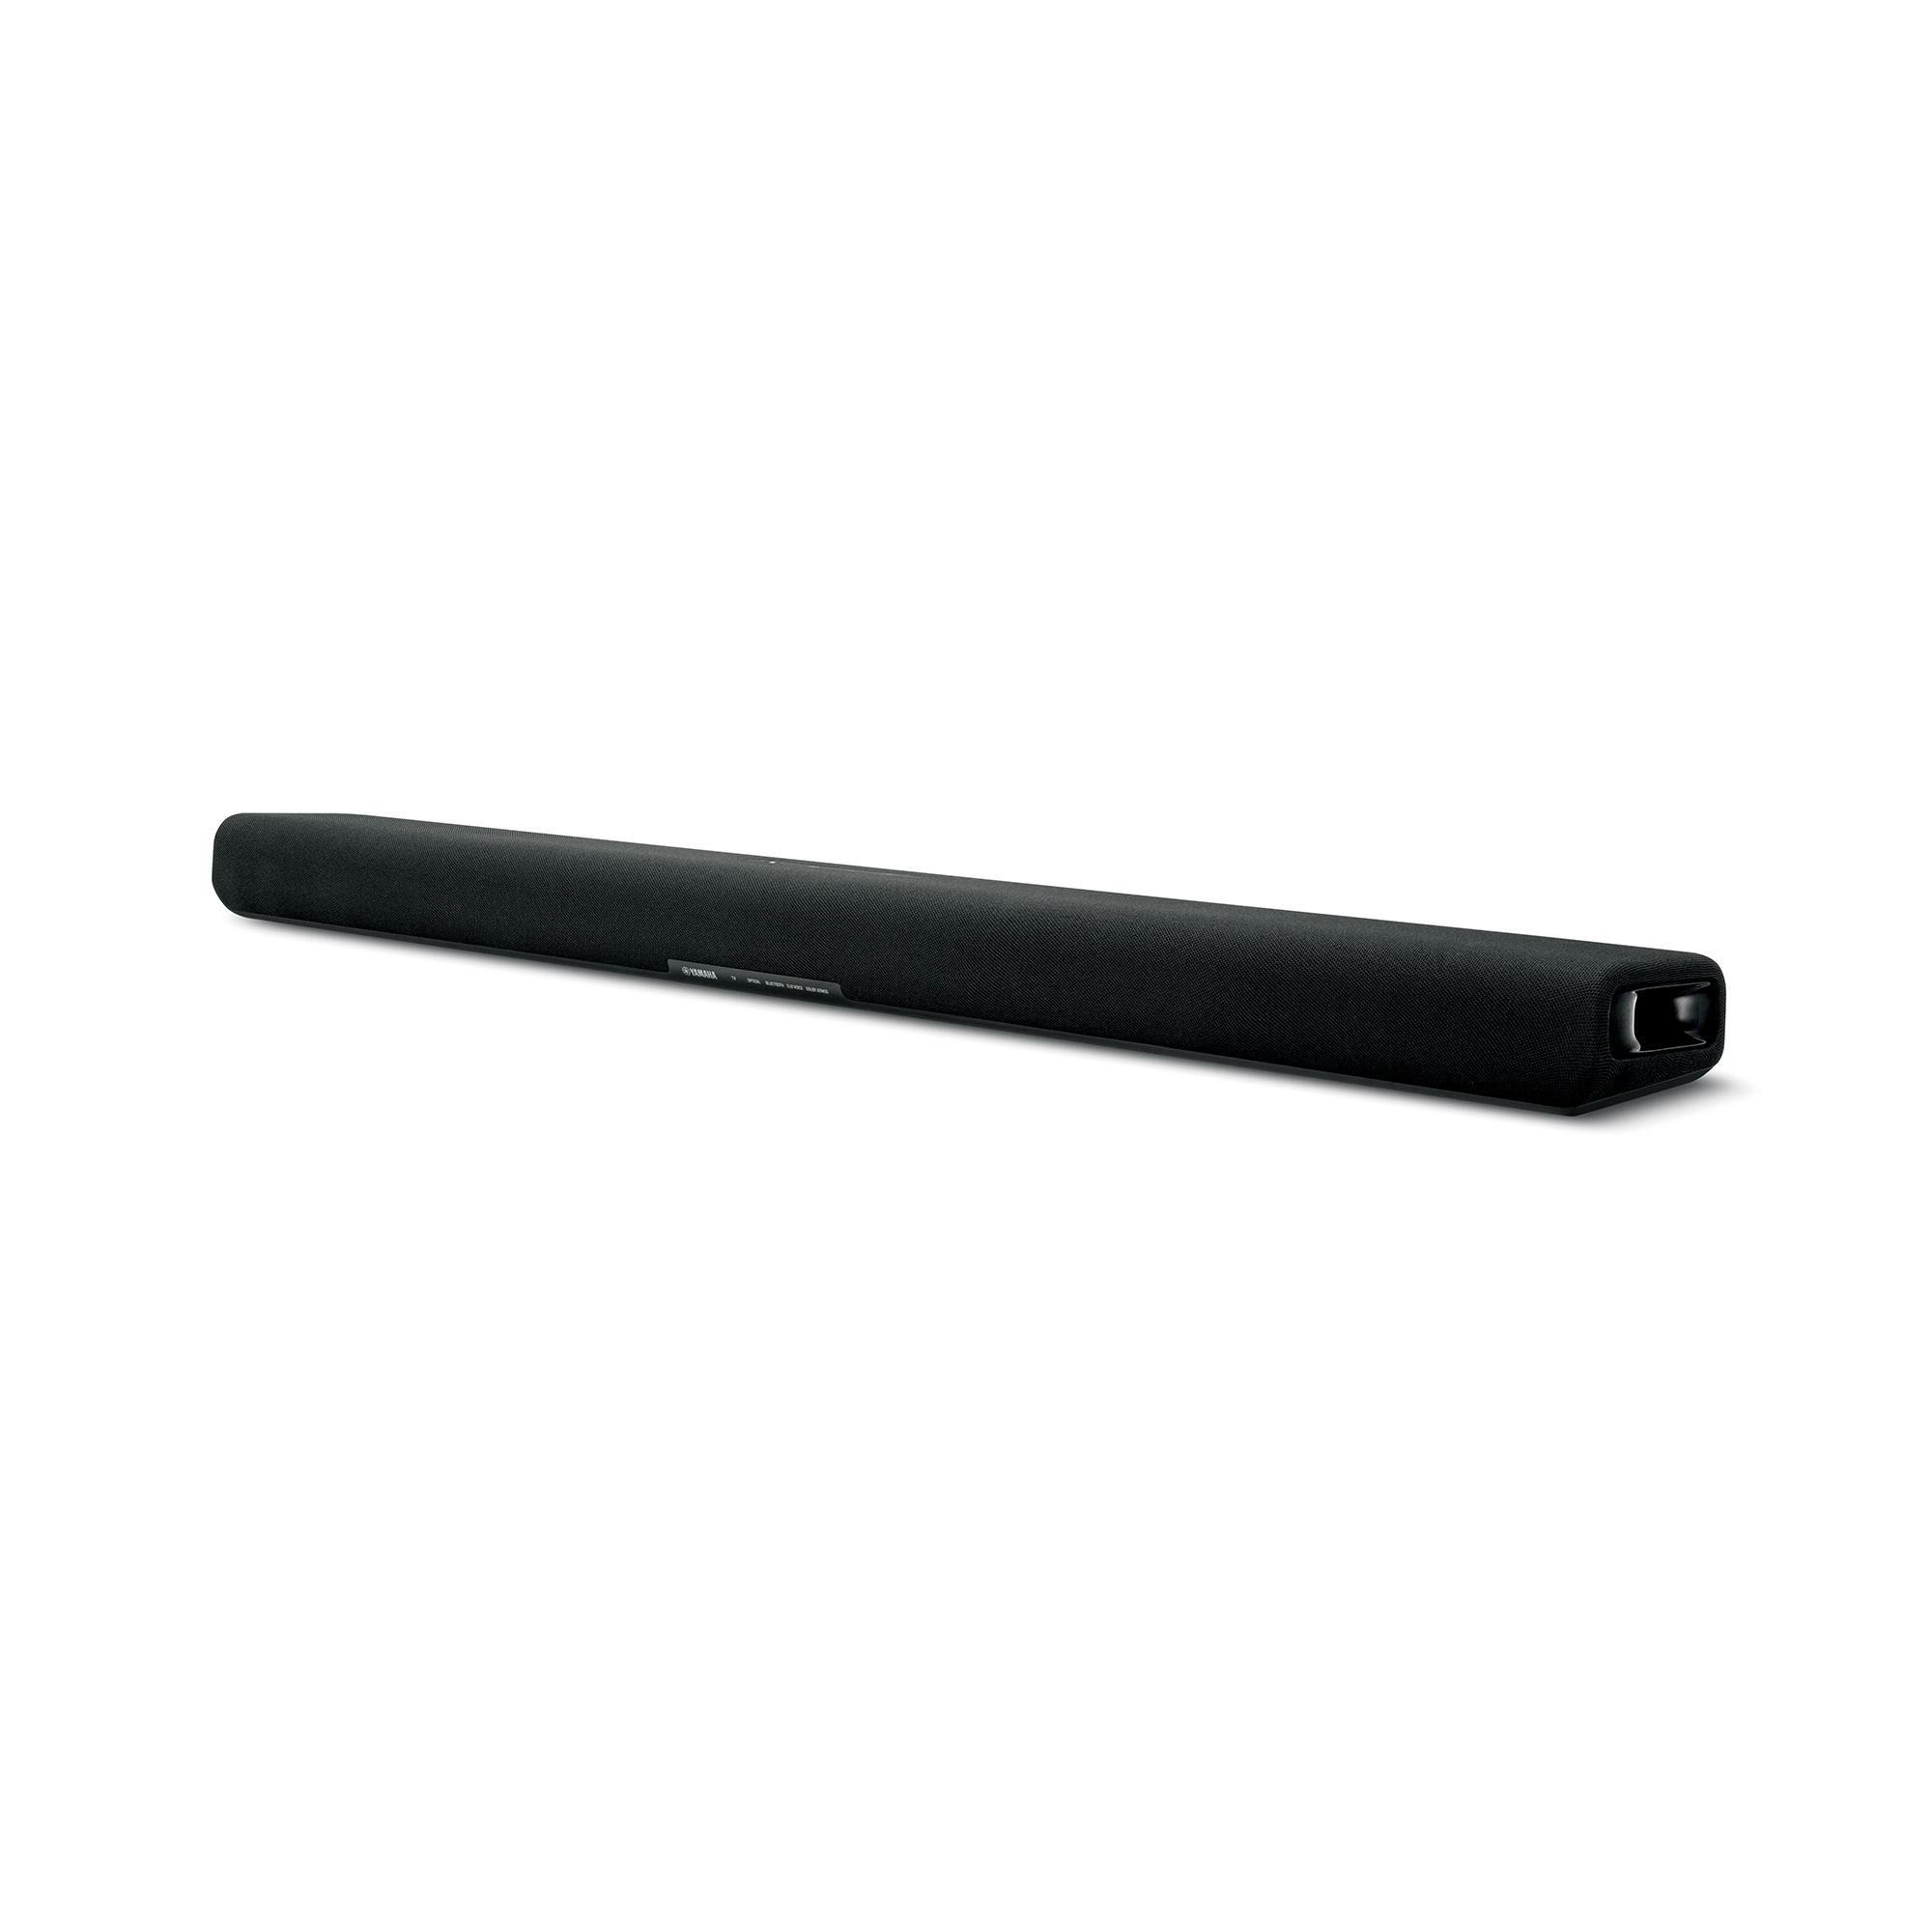 SR-C20A - Overview - Sound Bars - Audio & Visual - Products 